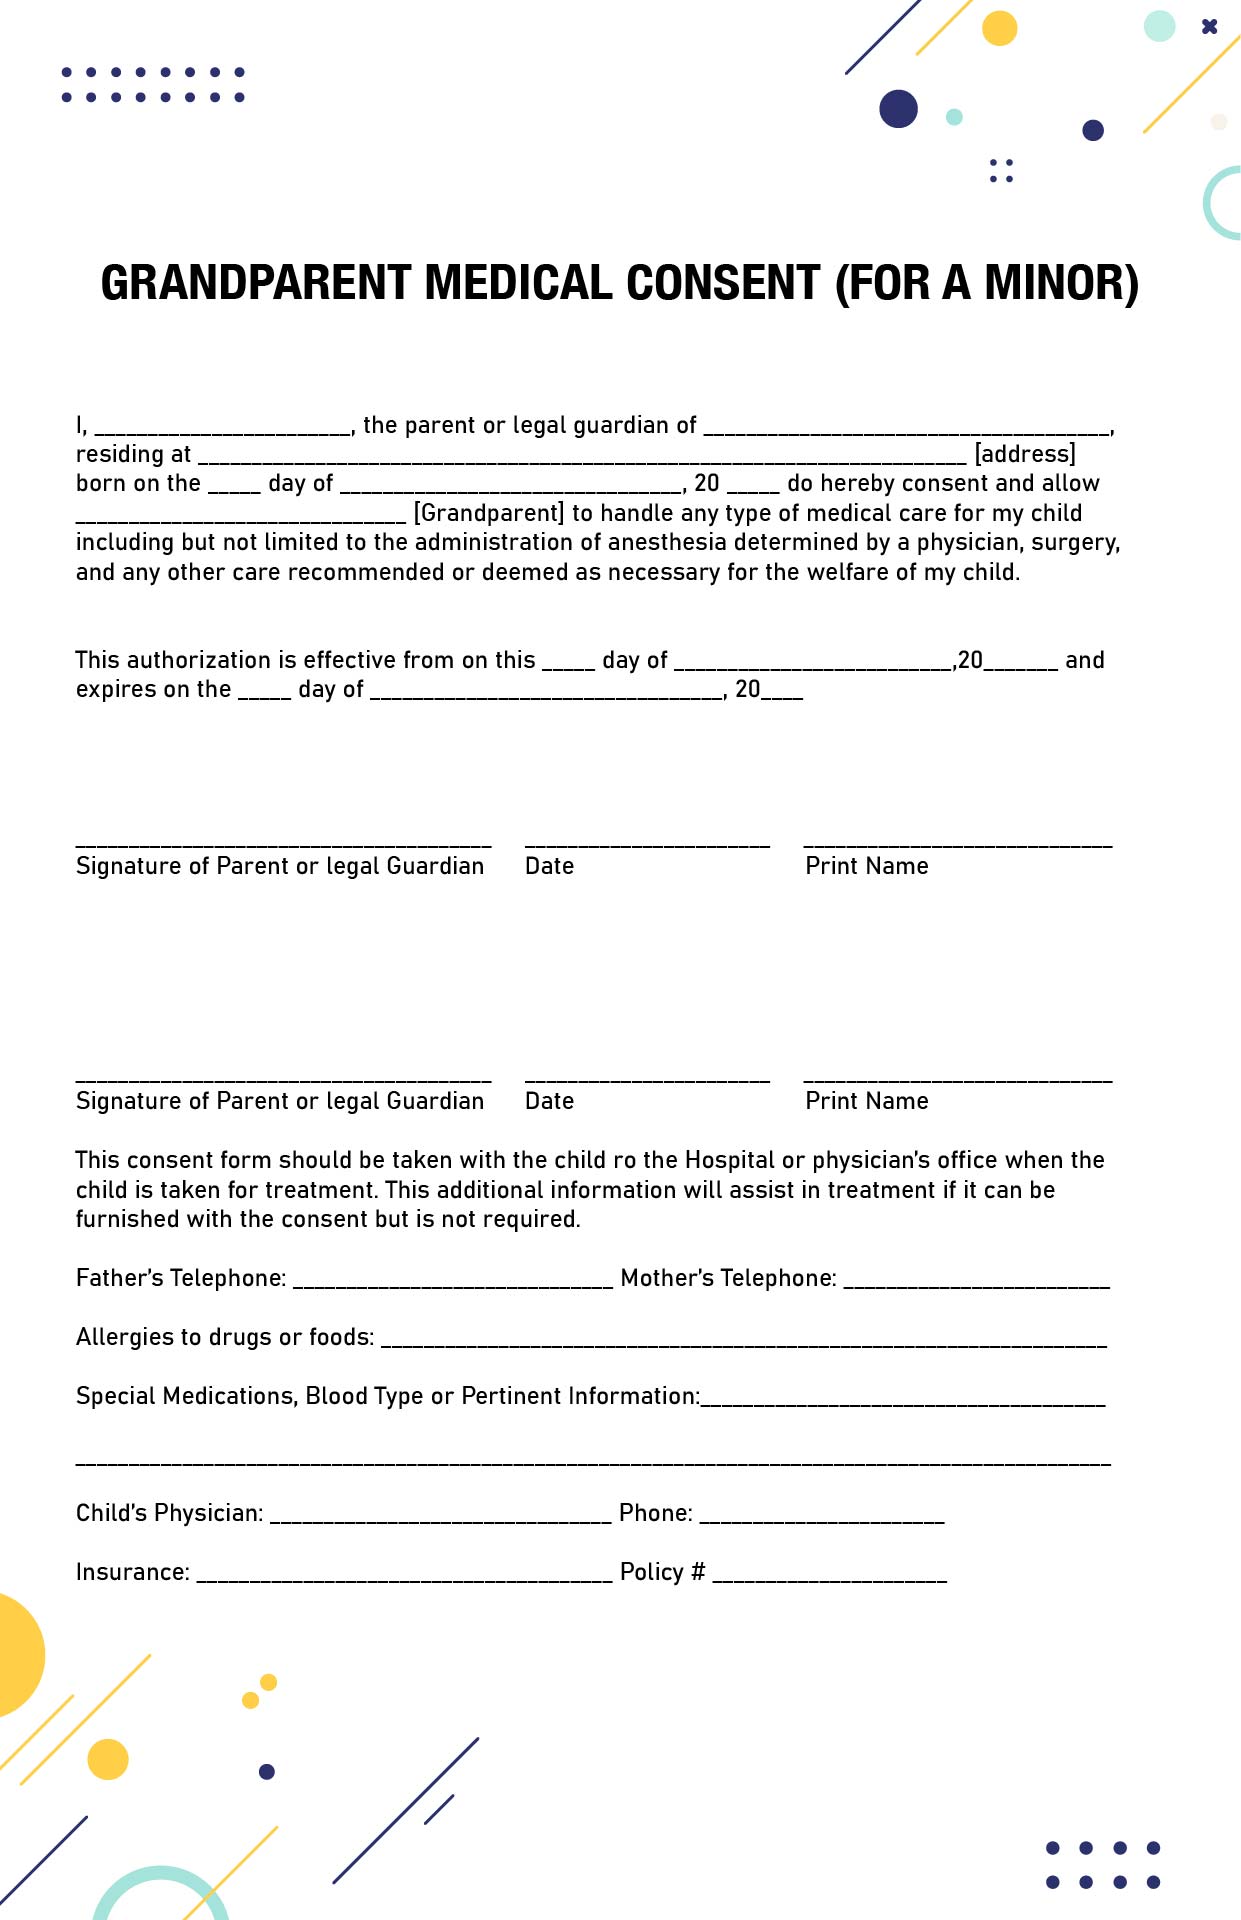 Printable Medical Consent Form for Grandparents